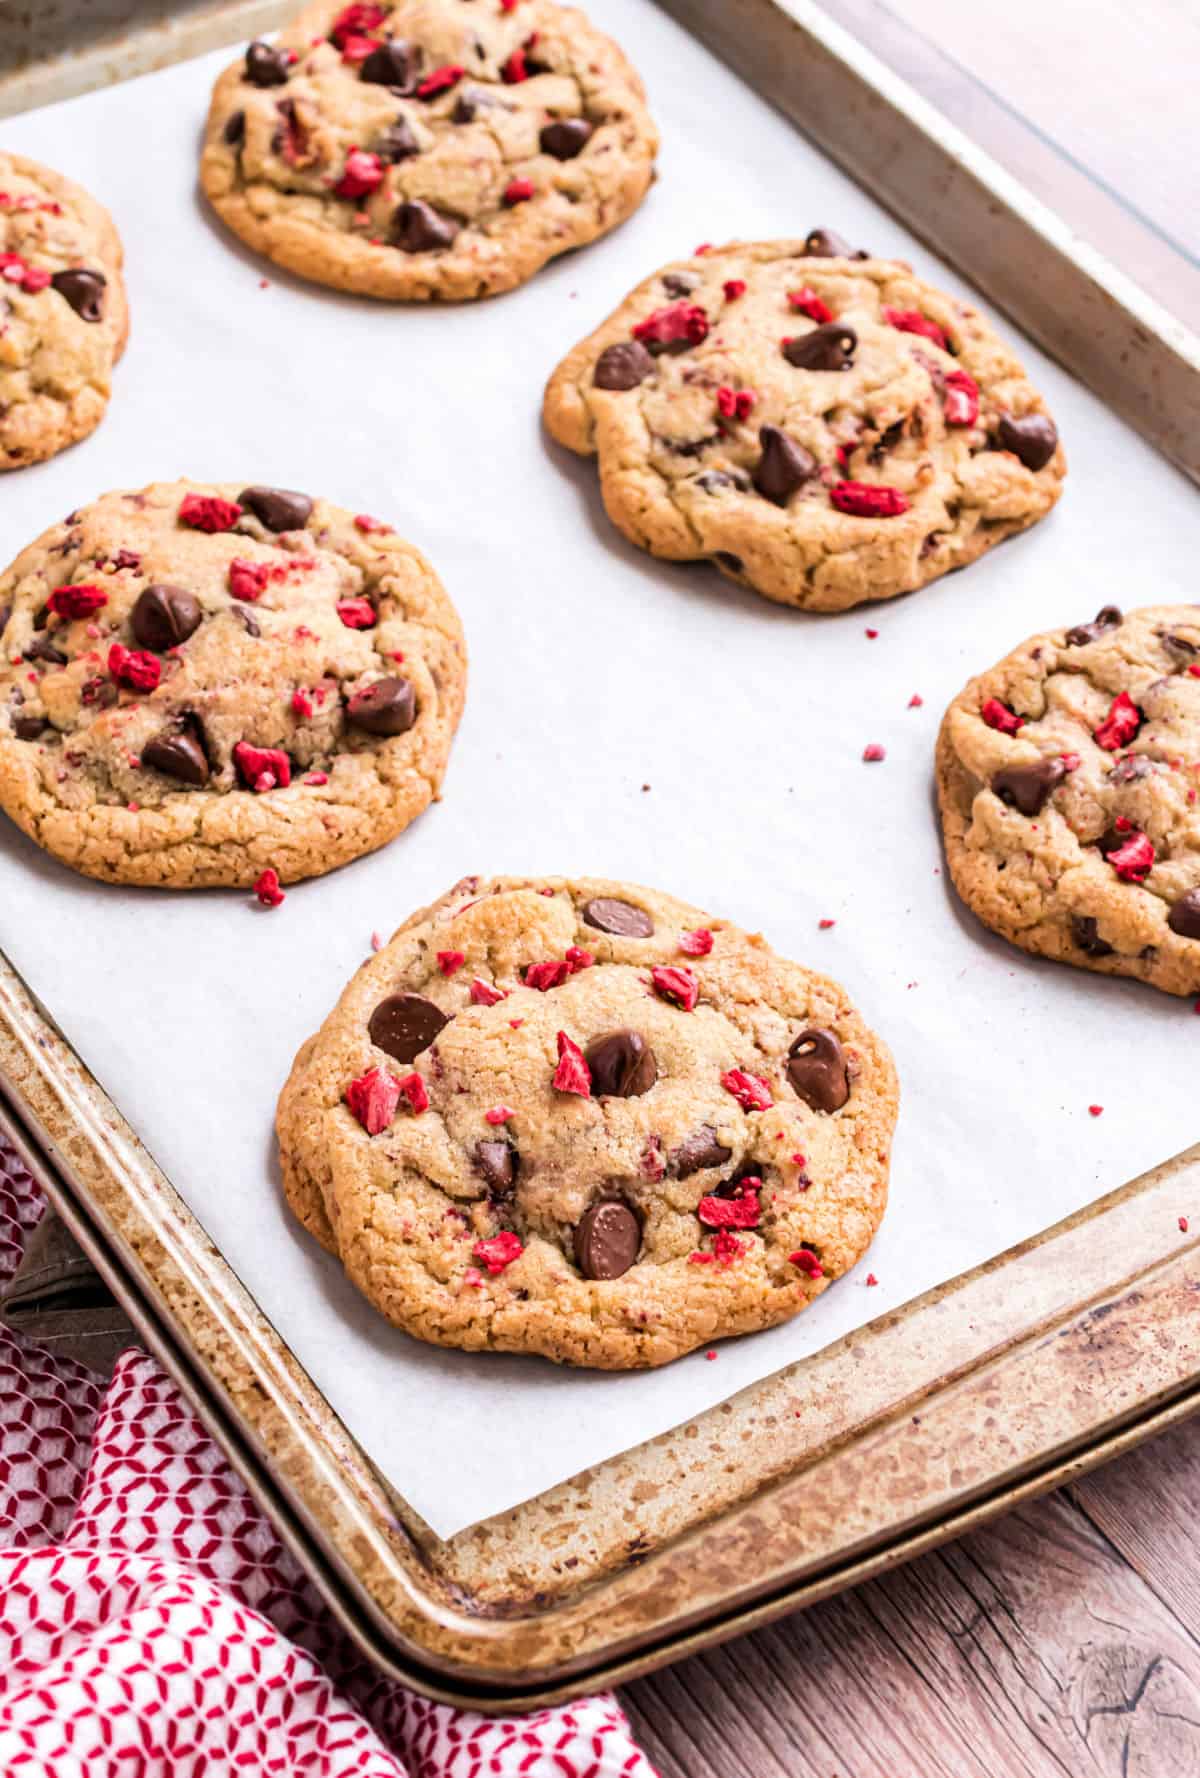 Chocolate chip cookies with strawberry pieces on parchment paper lined cookie sheet.